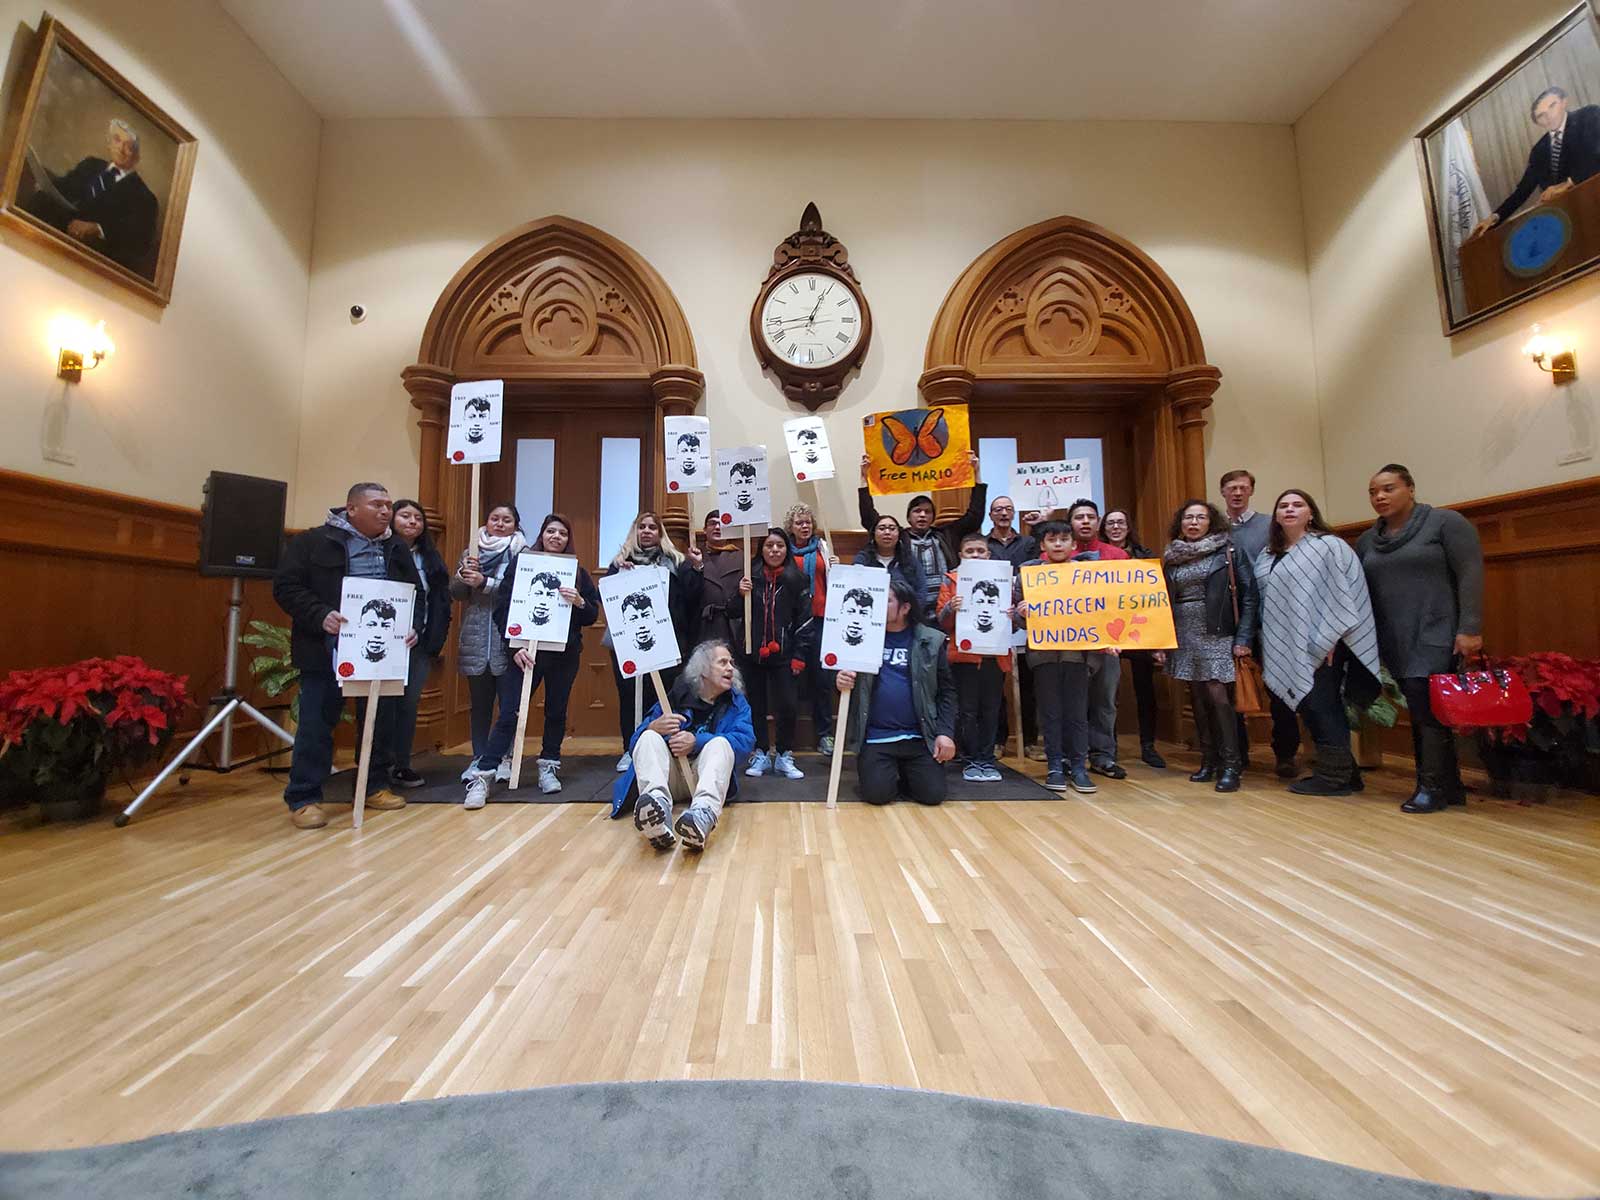 Protesters stand and sit with signs on a wooden floor.